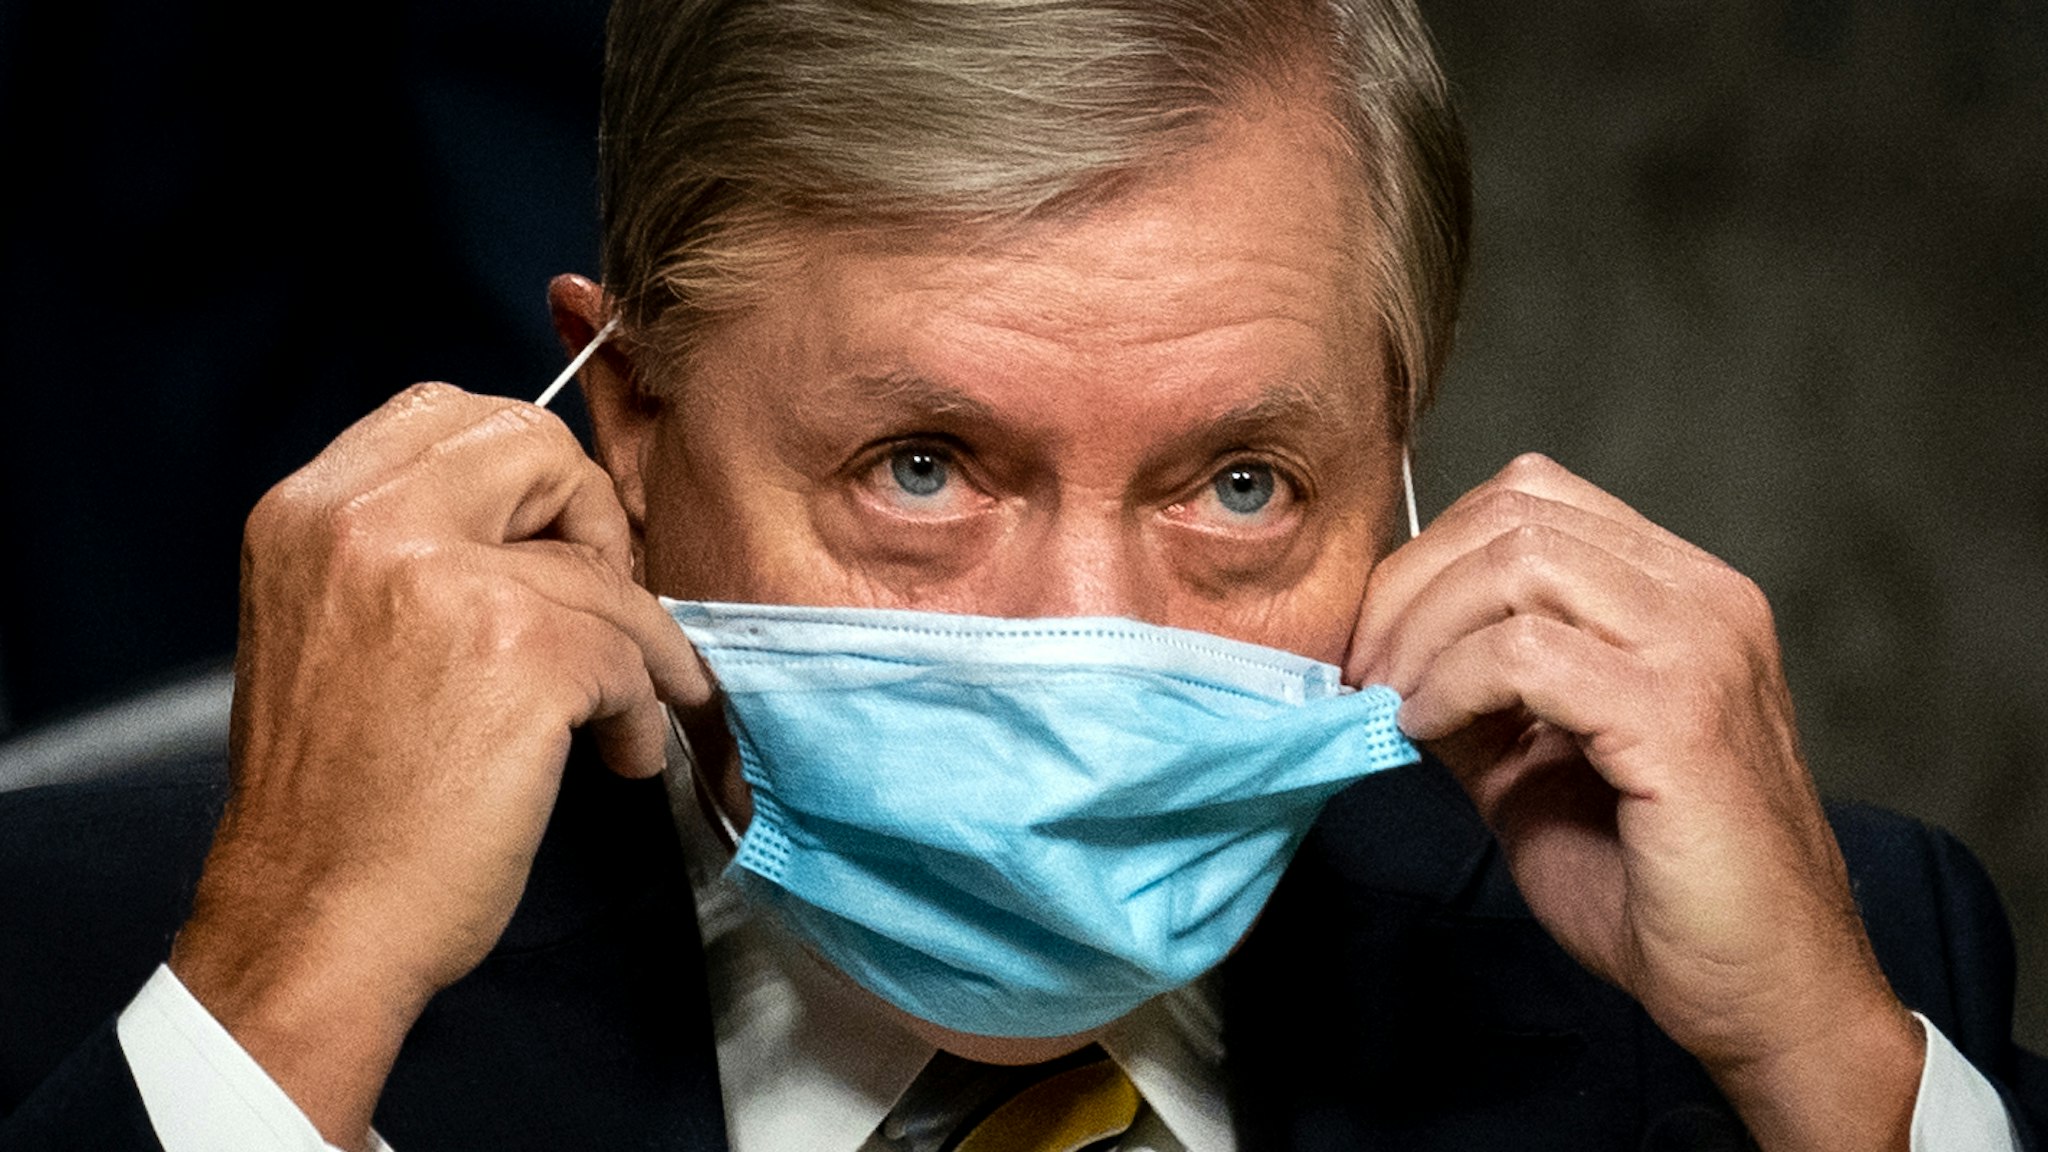 WASHINGTON, DC - AUGUST 05: Committee Chairman Sen. Lindsey Graham (R-SC) removes his face mask before the start a Senate Judiciary Committee hearing on "Oversight of the Crossfire Hurricane Investigation" on Capitol Hill on August 5, 2020 in Washington, DC. Crossfire Hurricane was an FBI counterintelligence investigation relating to contacts between Russian officials and associates of Donald Trump.